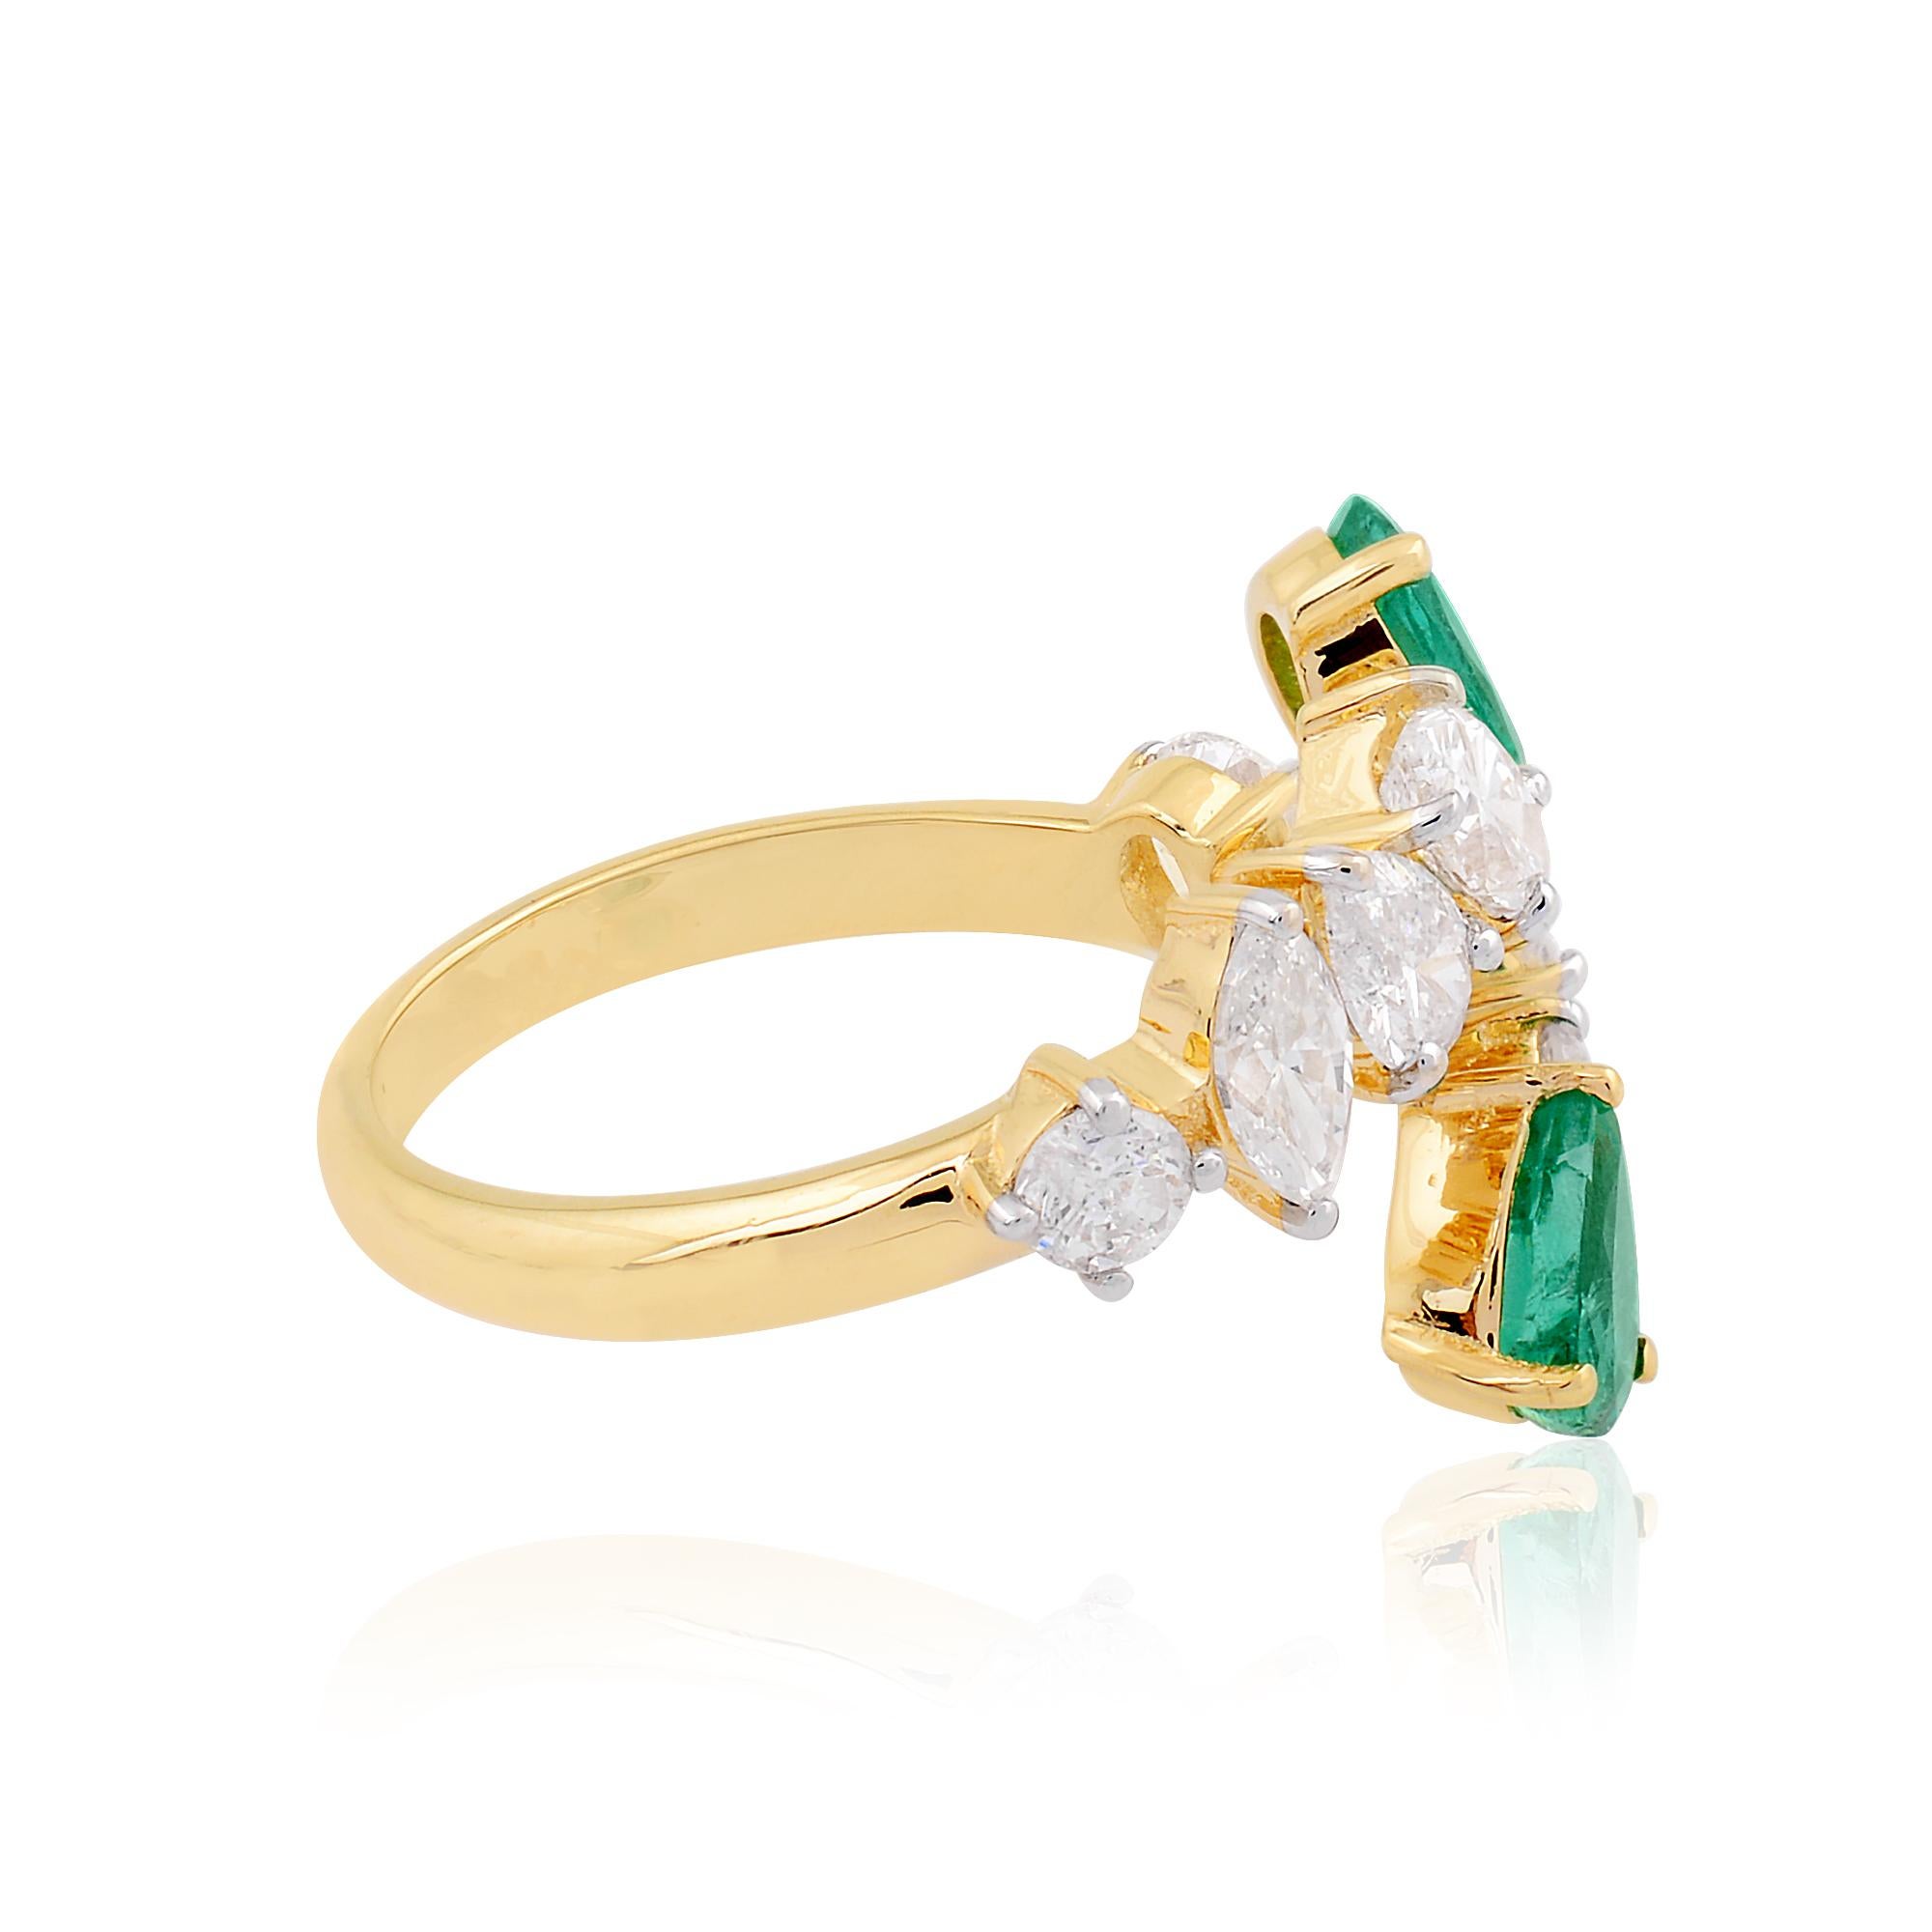 Item Code :- SER-2302F
Gross Wt :- 3.36 gm
14k Solid Yellow Gold Wt :- 2.92 gm
Natural Diamond Wt :- 1.50 ct ( AVERAGE DIAMOND CLARITY SI1-SI2 & COLOR H-I )
Zambian Emerald Wt :- 0.72 ct
Ring Size :- 7 US & All size available

✦